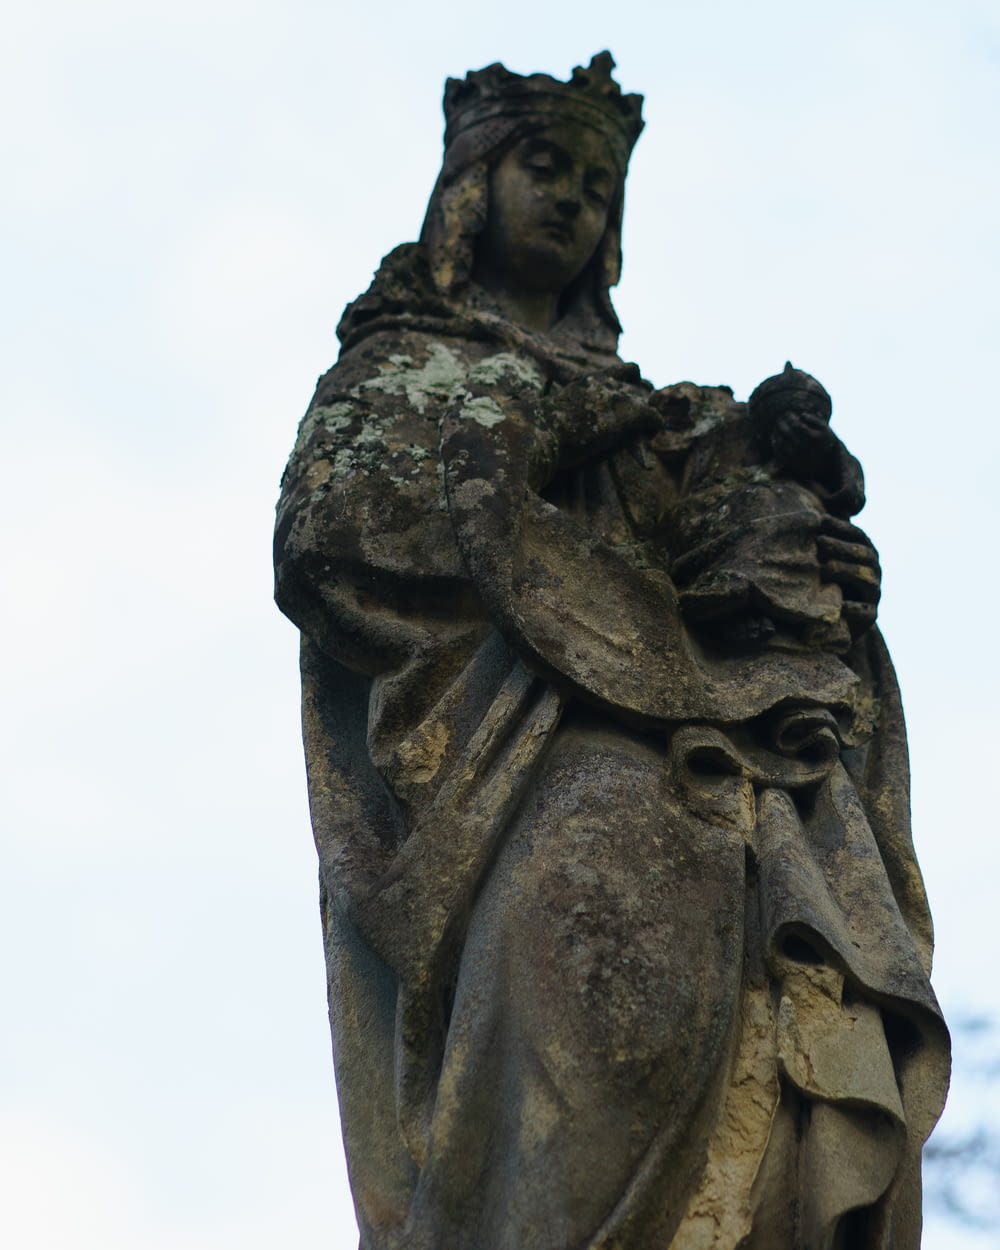 a statue of a woman with a crown on her head